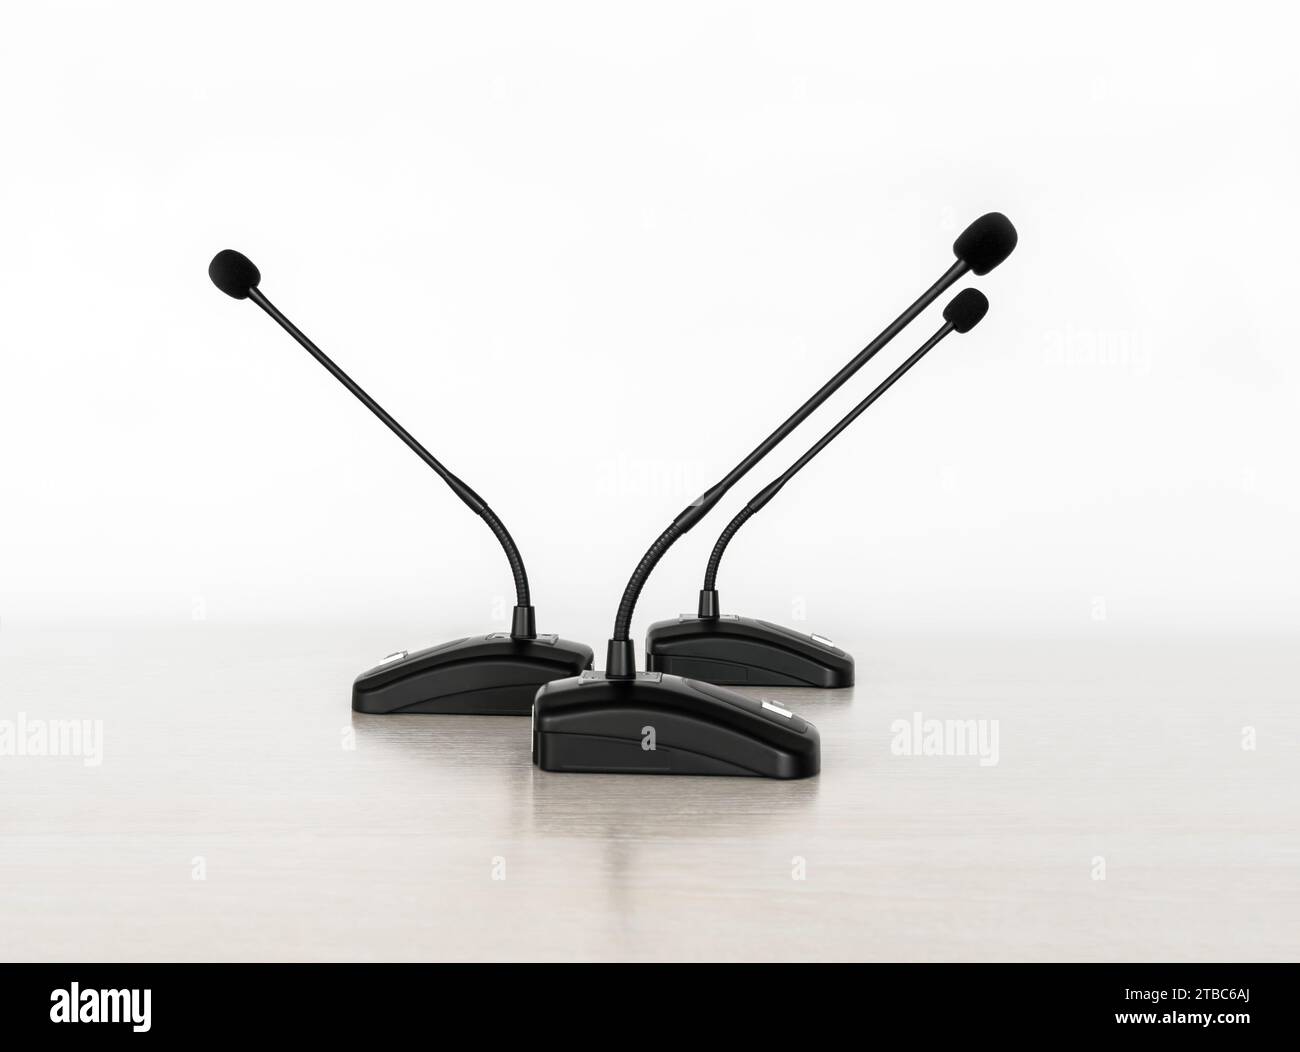 Three cardioid gooseneck microphones for conferences and desktop systems on a white background Stock Photo